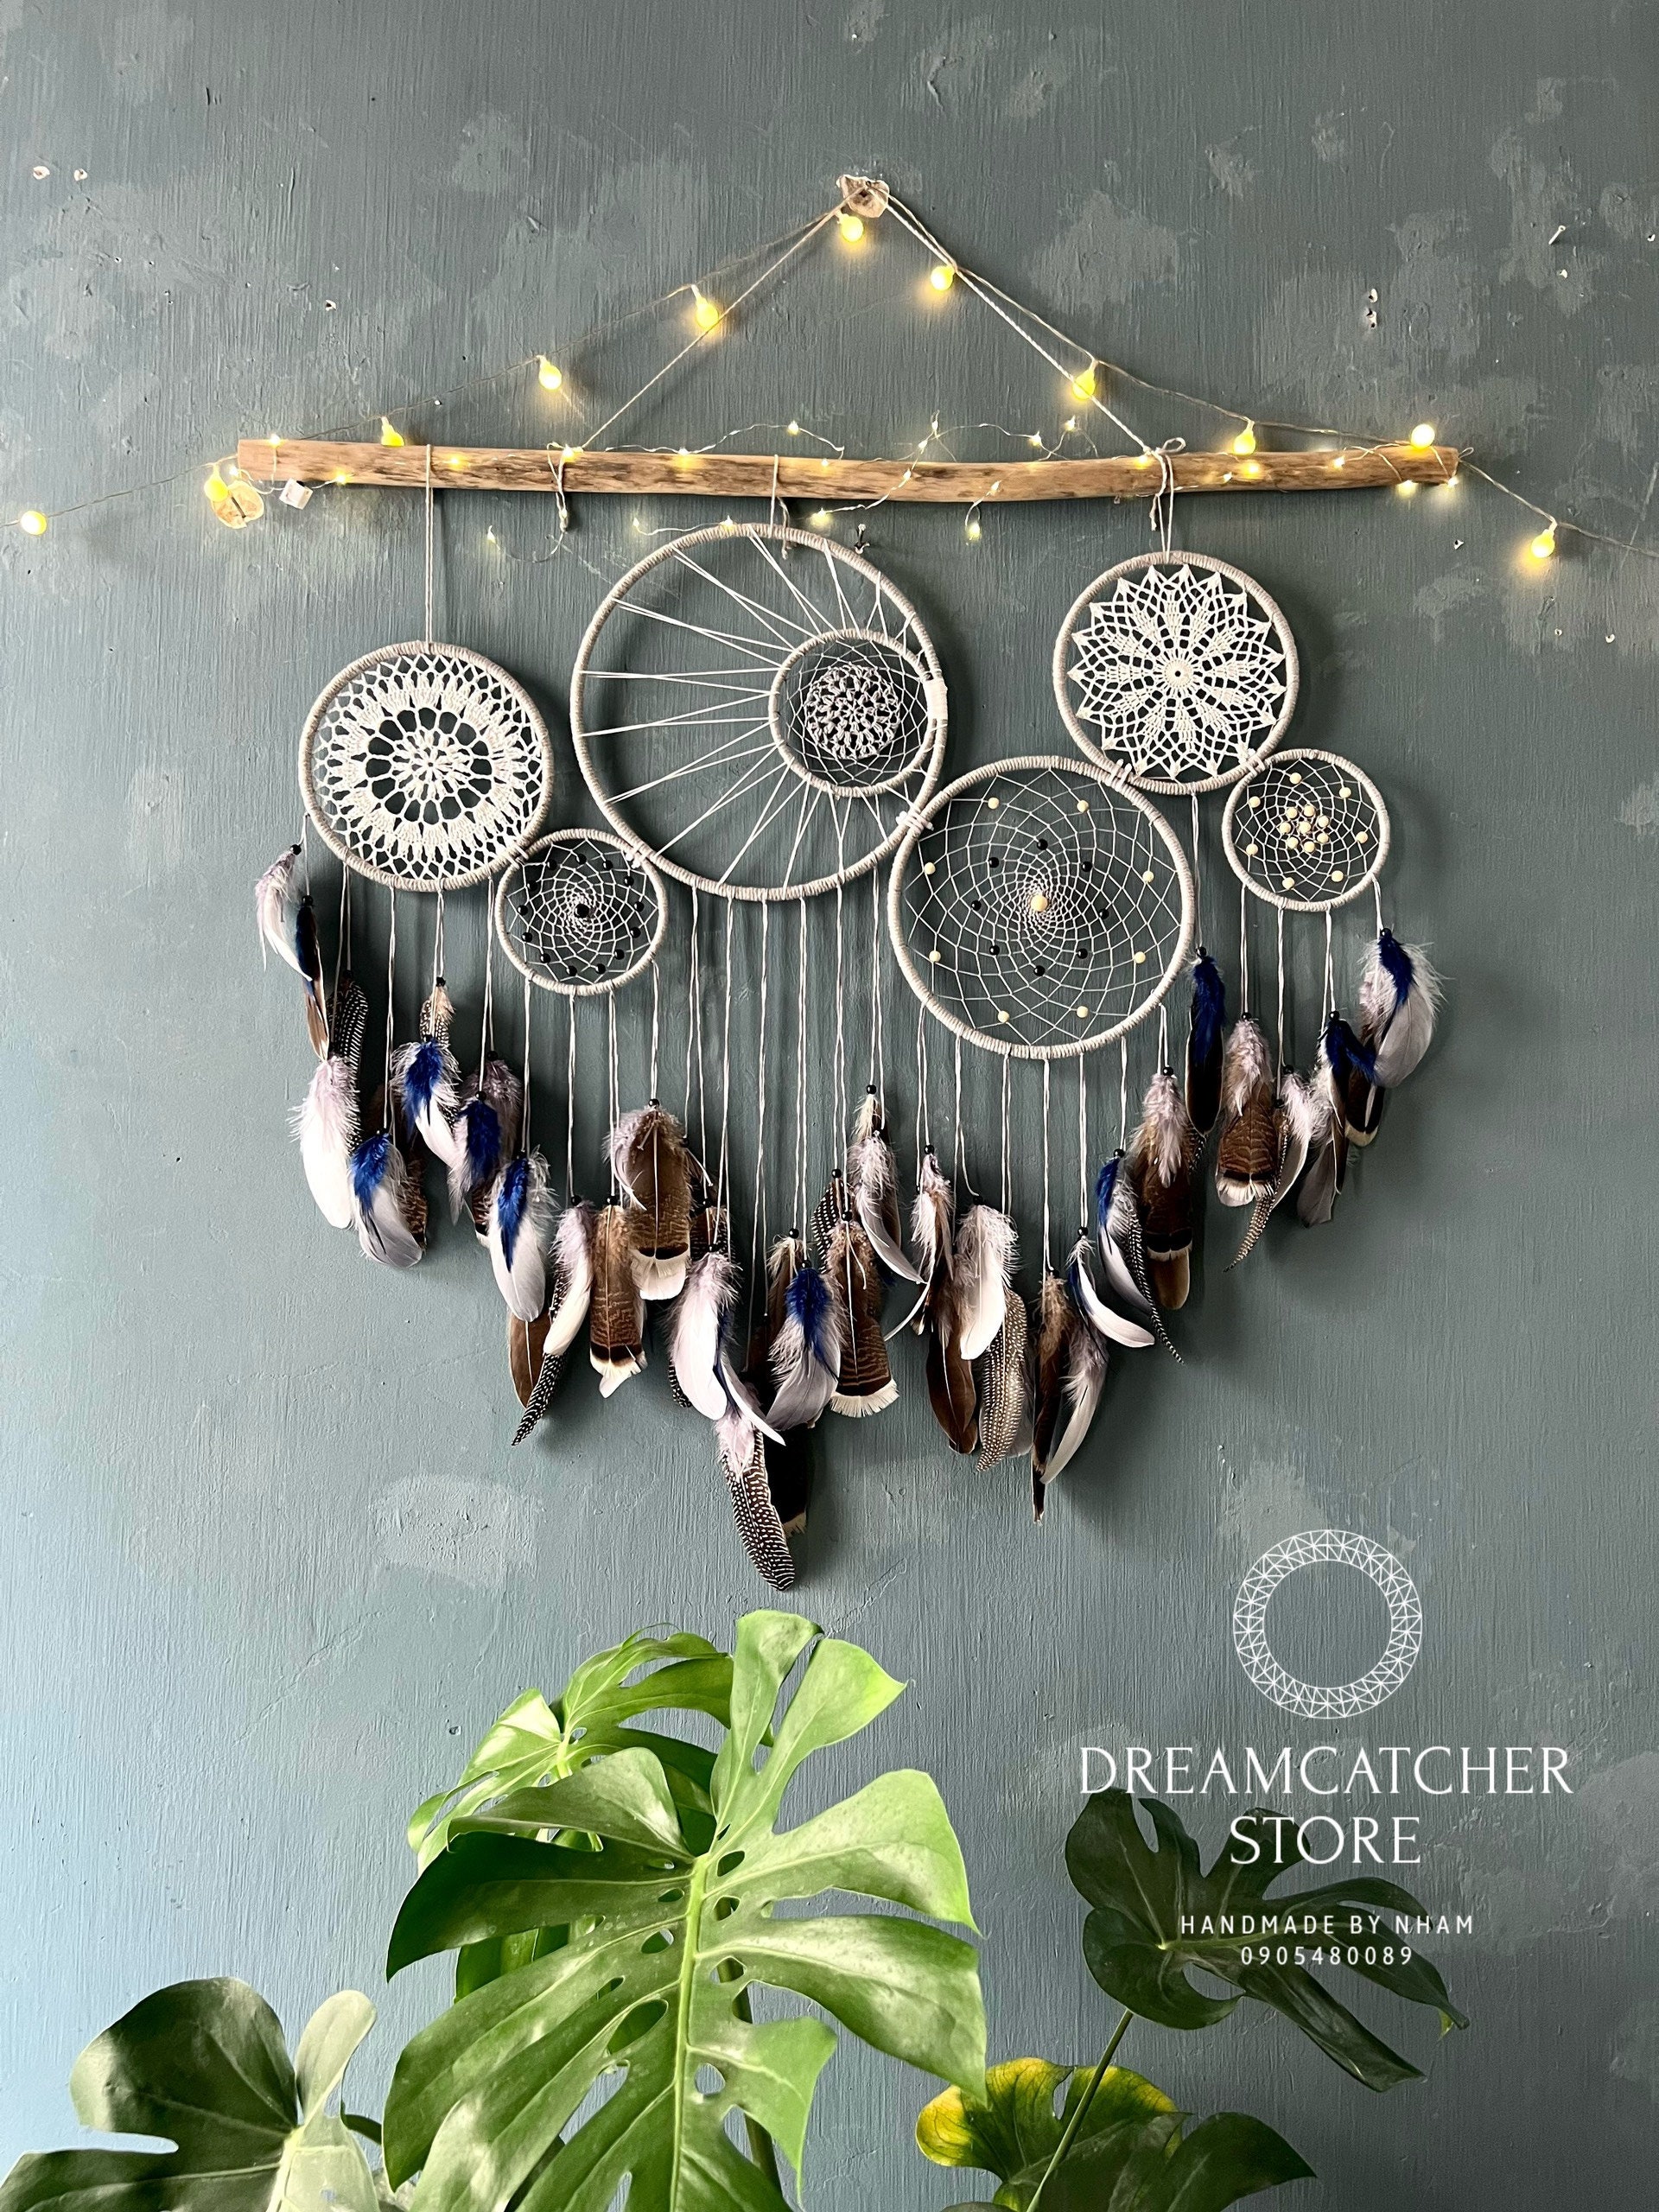 Large Dreamcatcher Hanging Over the Bed, Large Dream Catcher